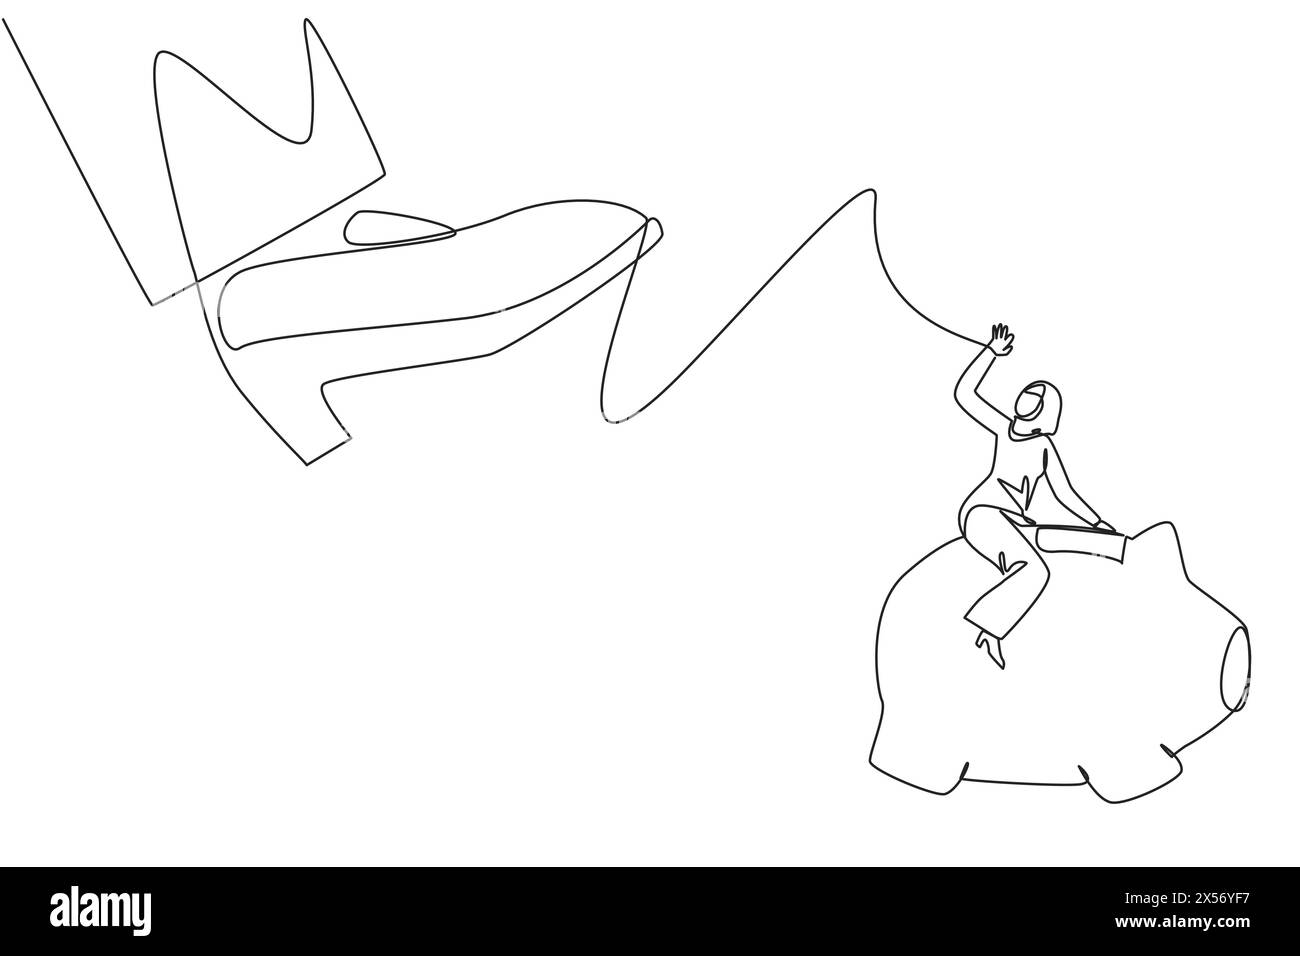 Single one line drawing Arabian businesswoman riding a piggy bank runs away from giant foot. Add expertise to acquire assets elsewhere. For a better f Stock Vector